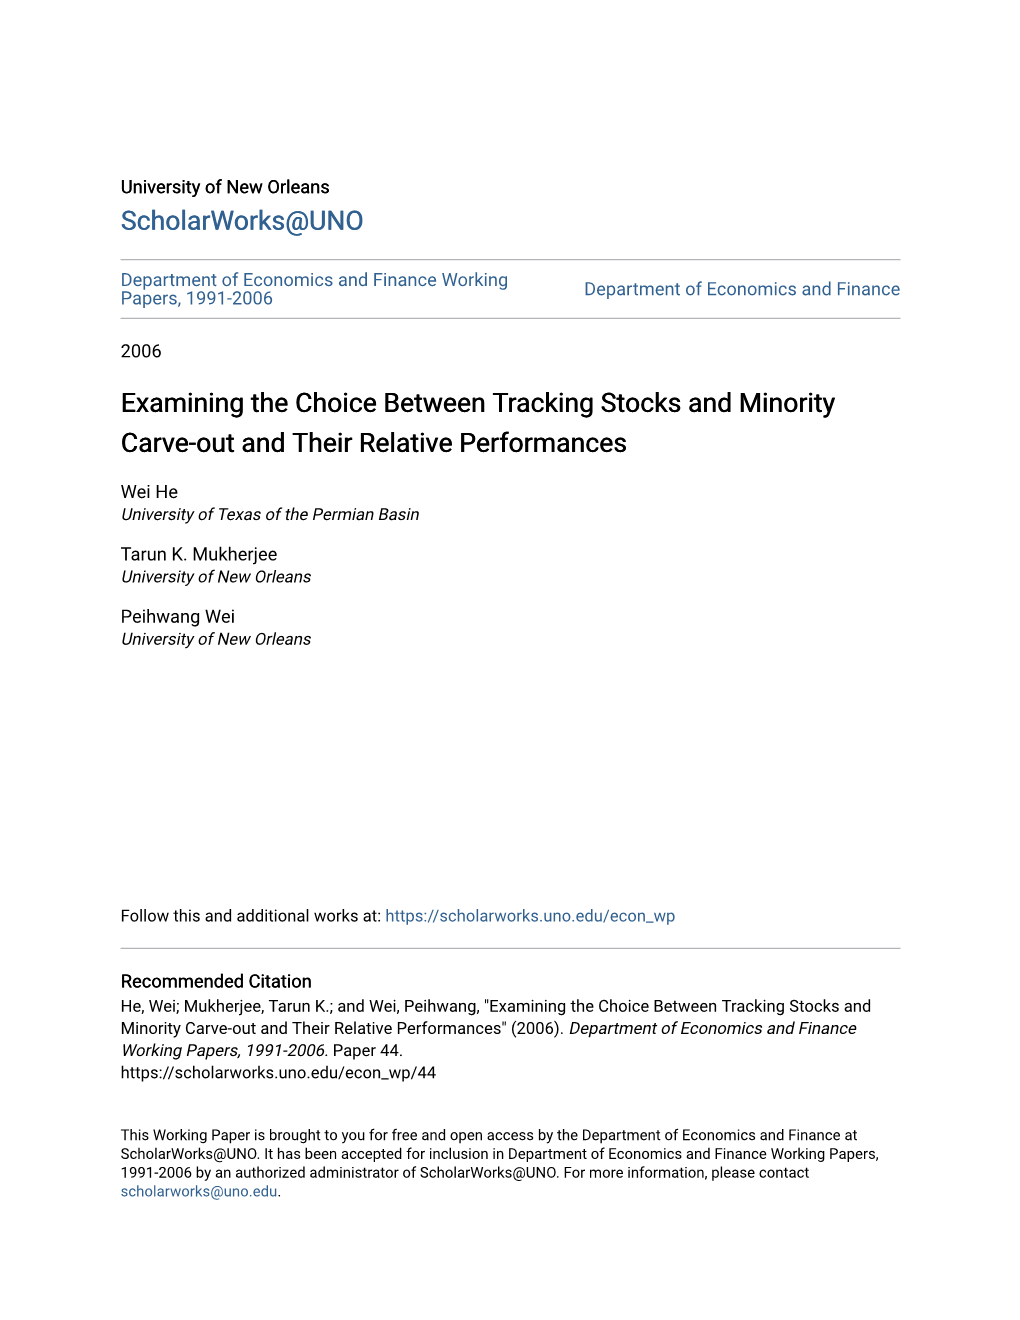 Examining the Choice Between Tracking Stocks and Minority Carve-Out and Their Relative Performances